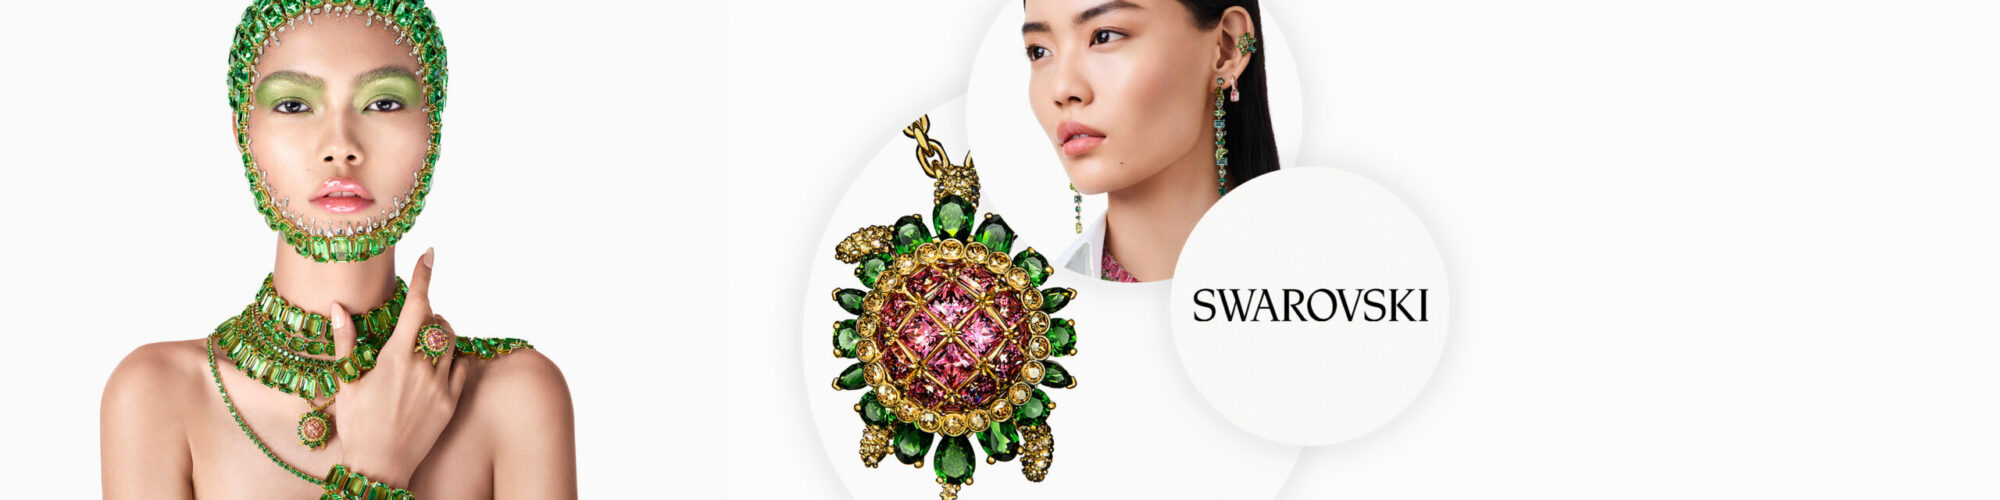 Swarovski Sucess Story - Connected Financial Planning